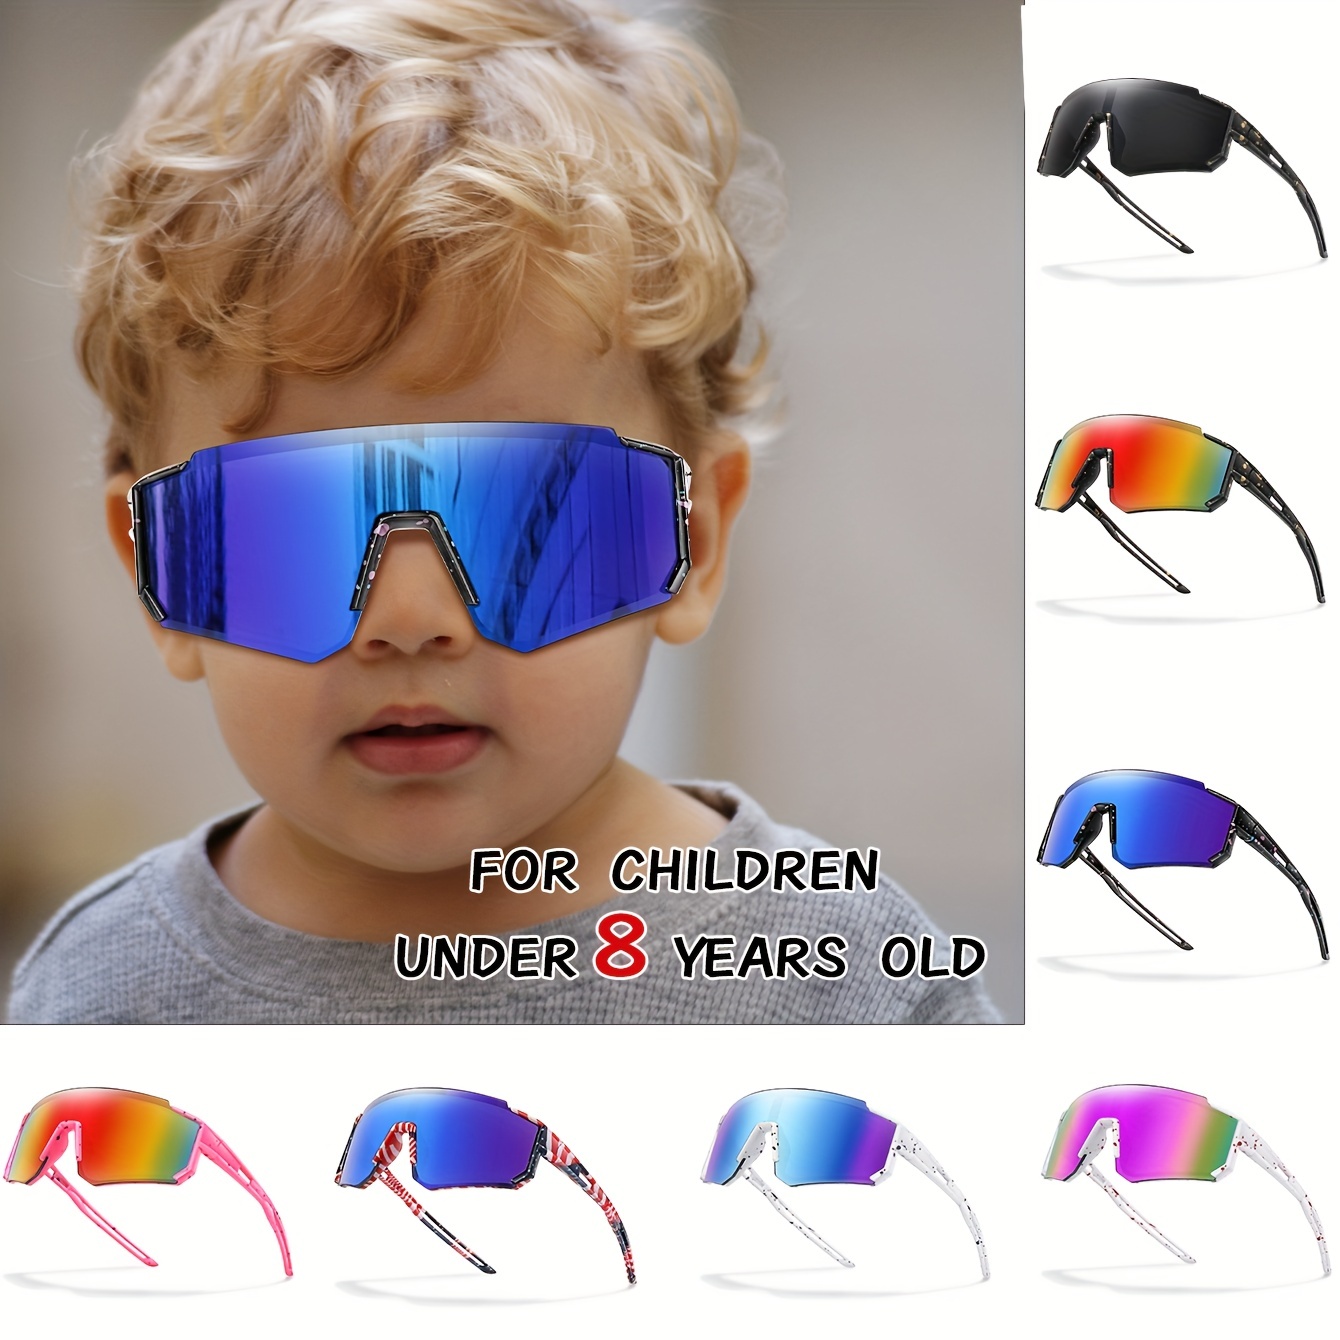 

Kids' Sports Fashion Glasses For Ages 3-8 - Uv400 Protection, Comfort Fit For Running, Cycling & Baseball - Unisex, Multiple Colors, Durable Hard Case Included